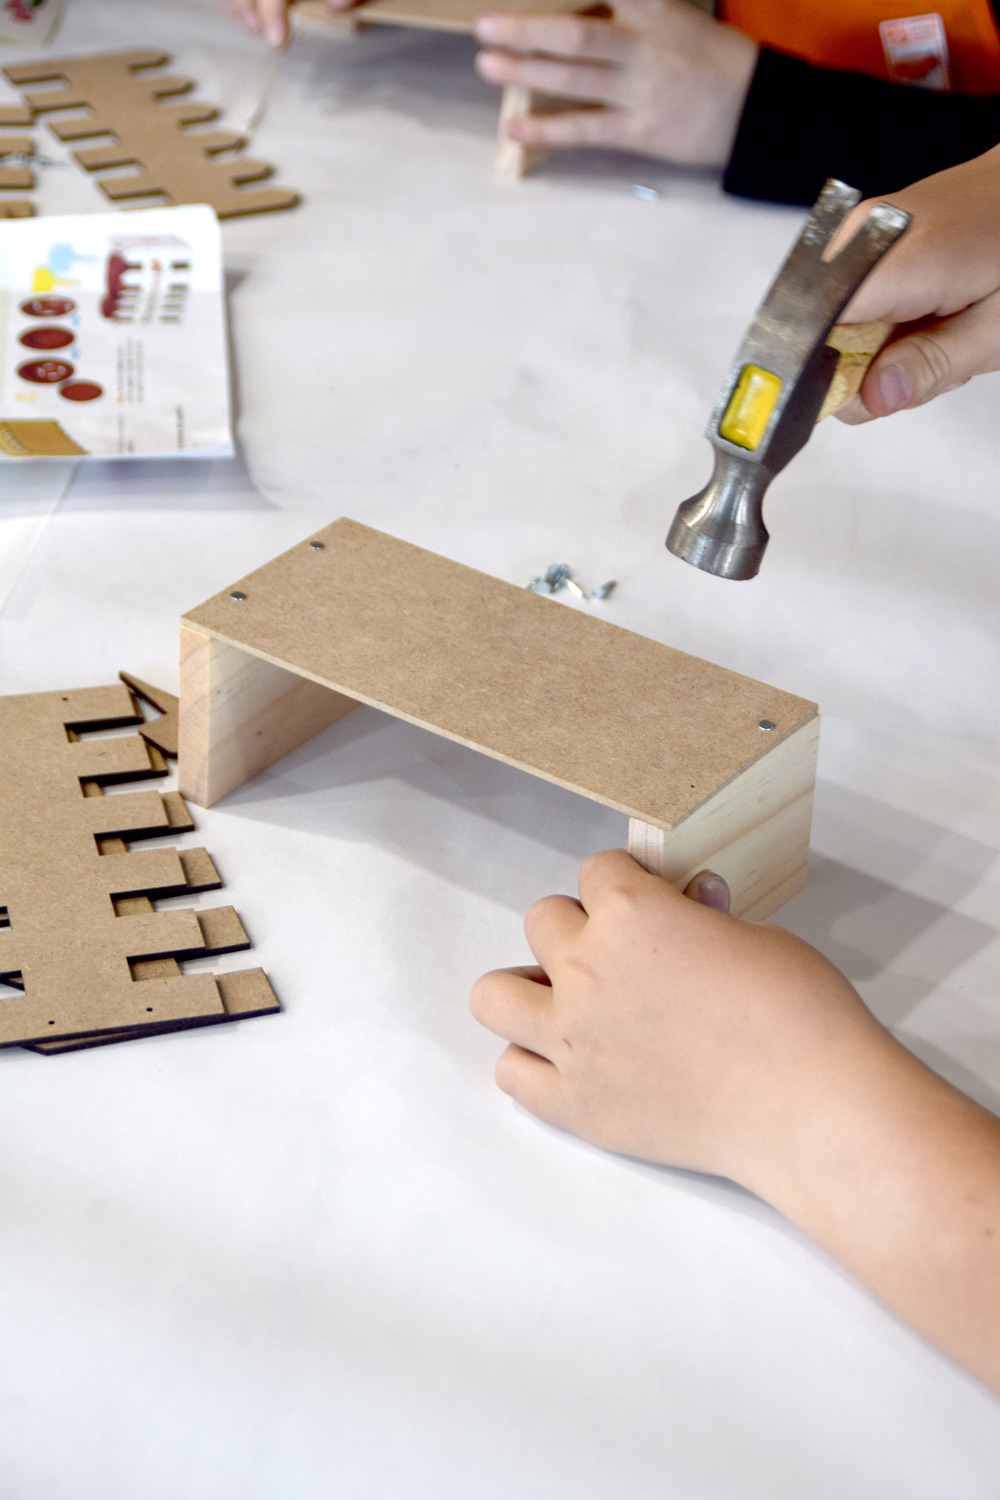 A child’s hands using a hammer to nail together Picket Fence Planter pieces.